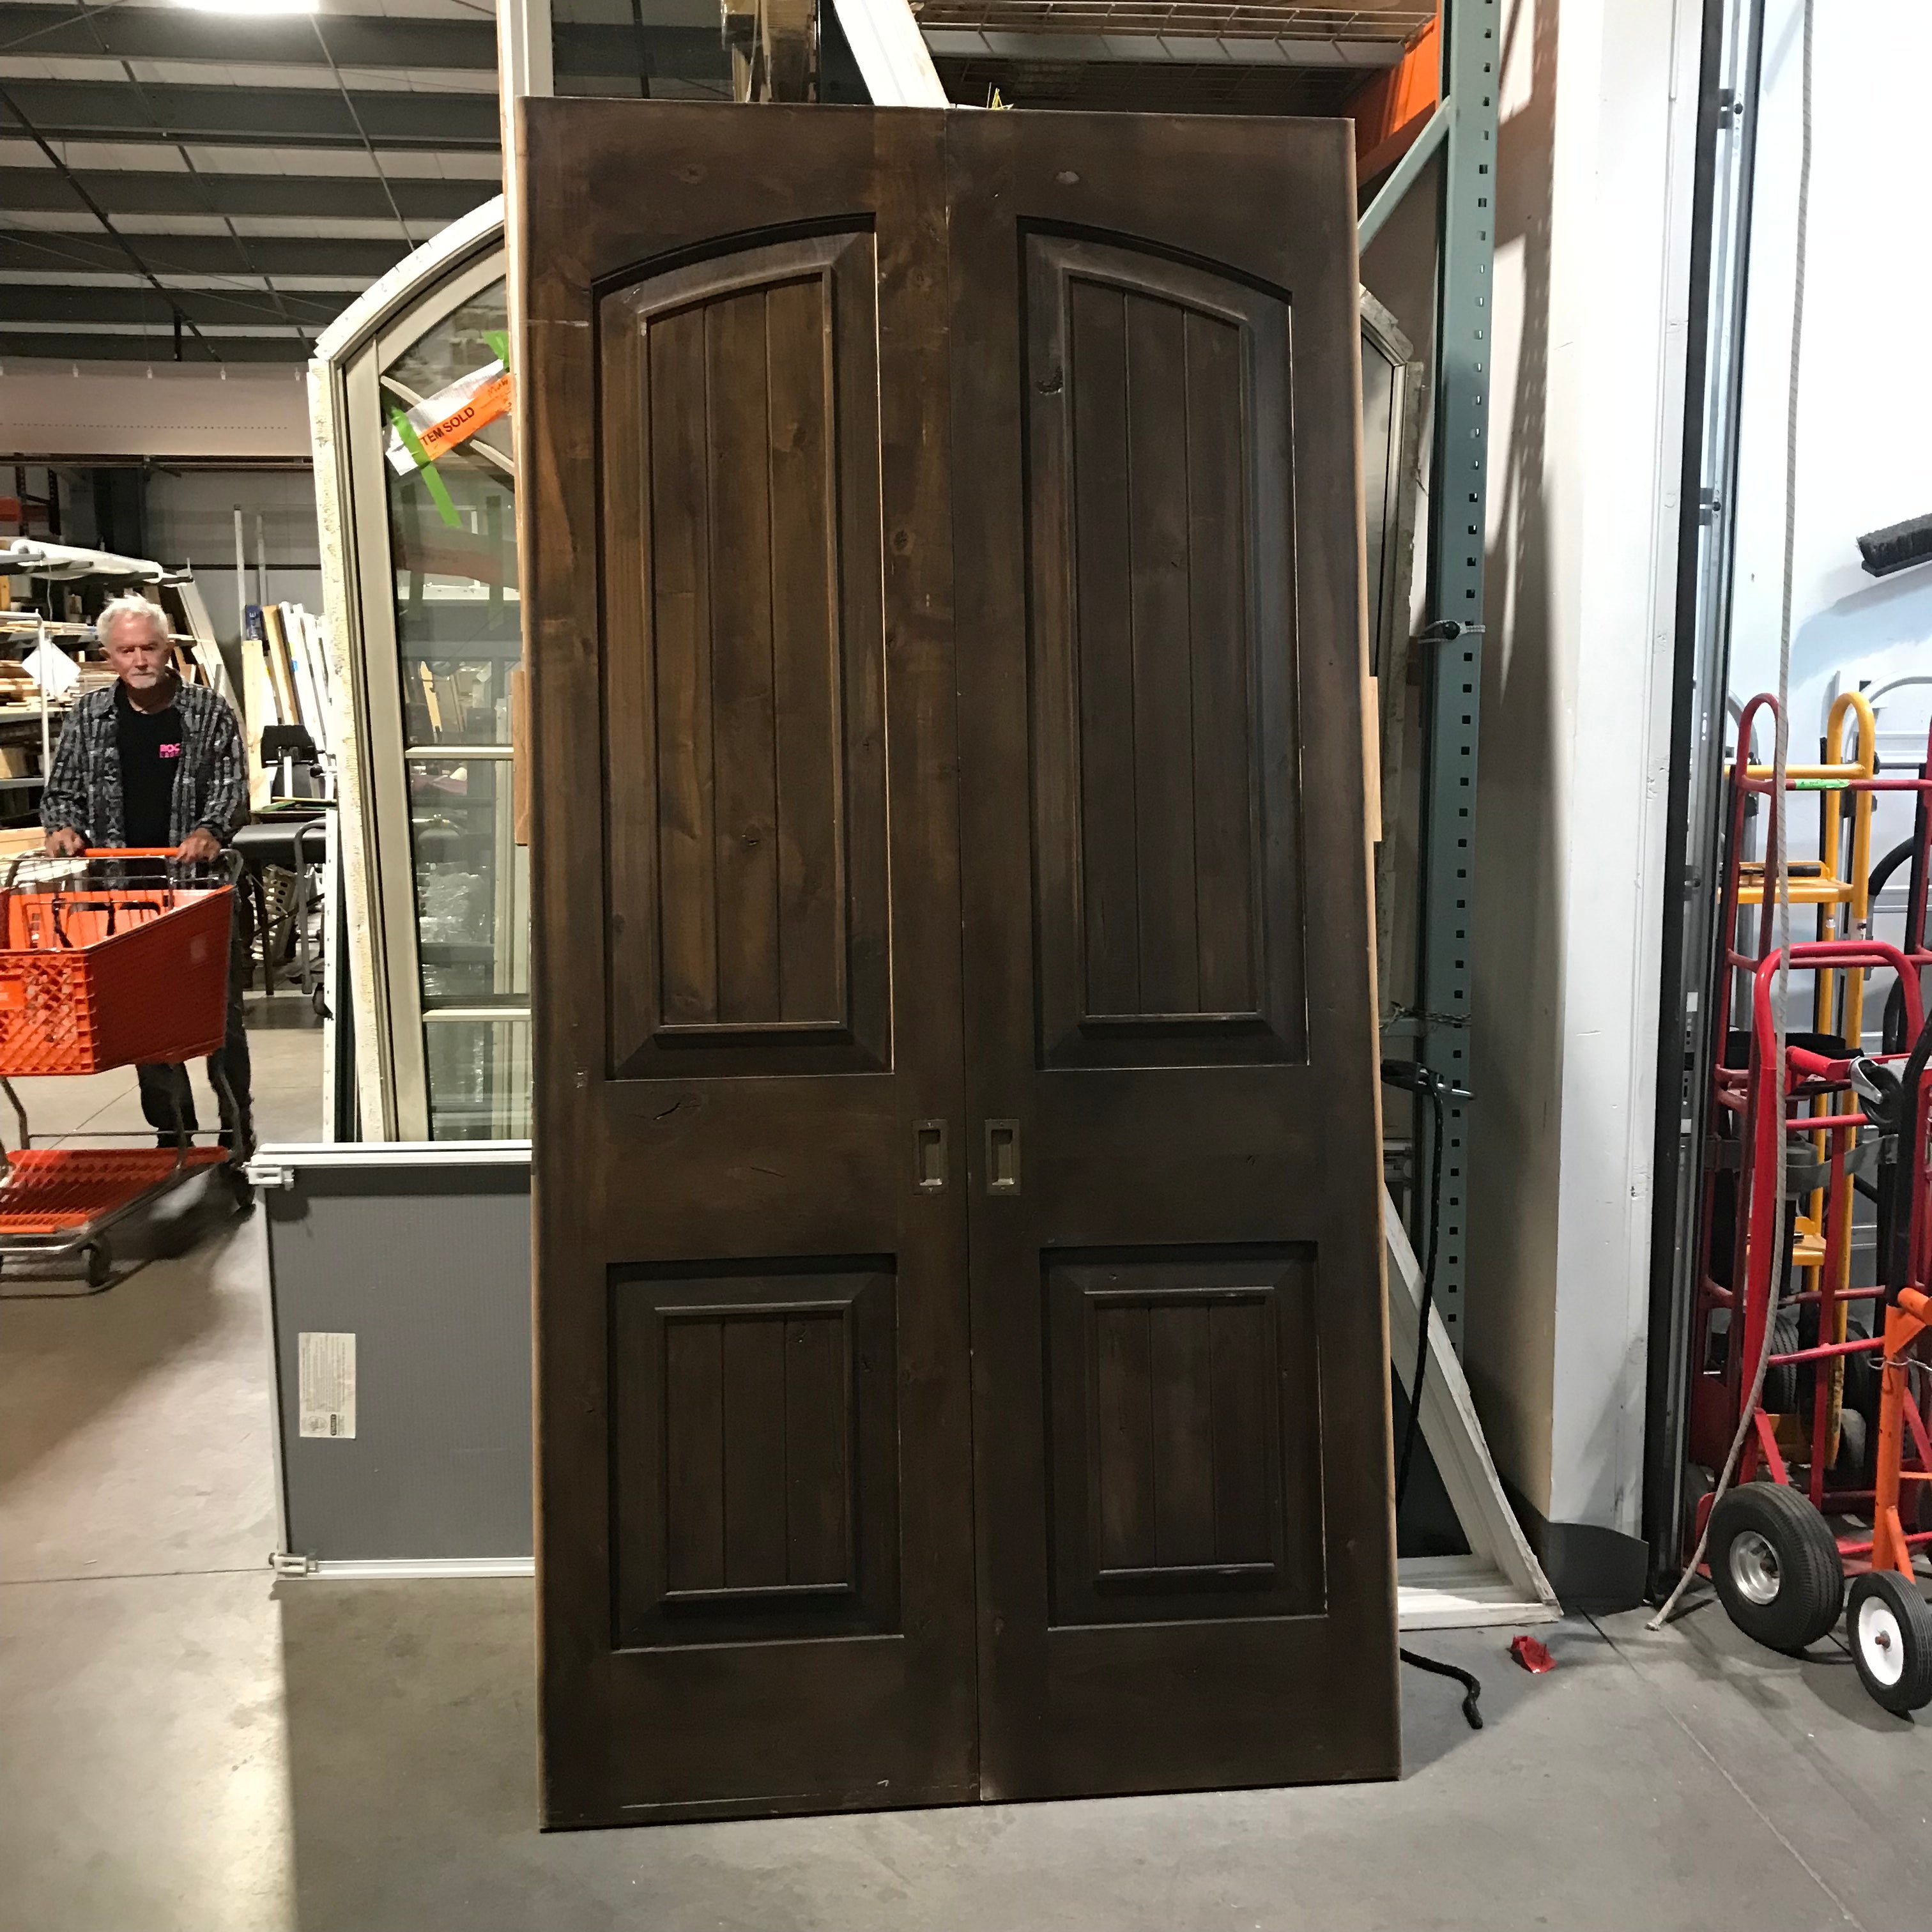 48"x 95"x 1.75" Stained Knotty Alder Pocket Doors (pair)